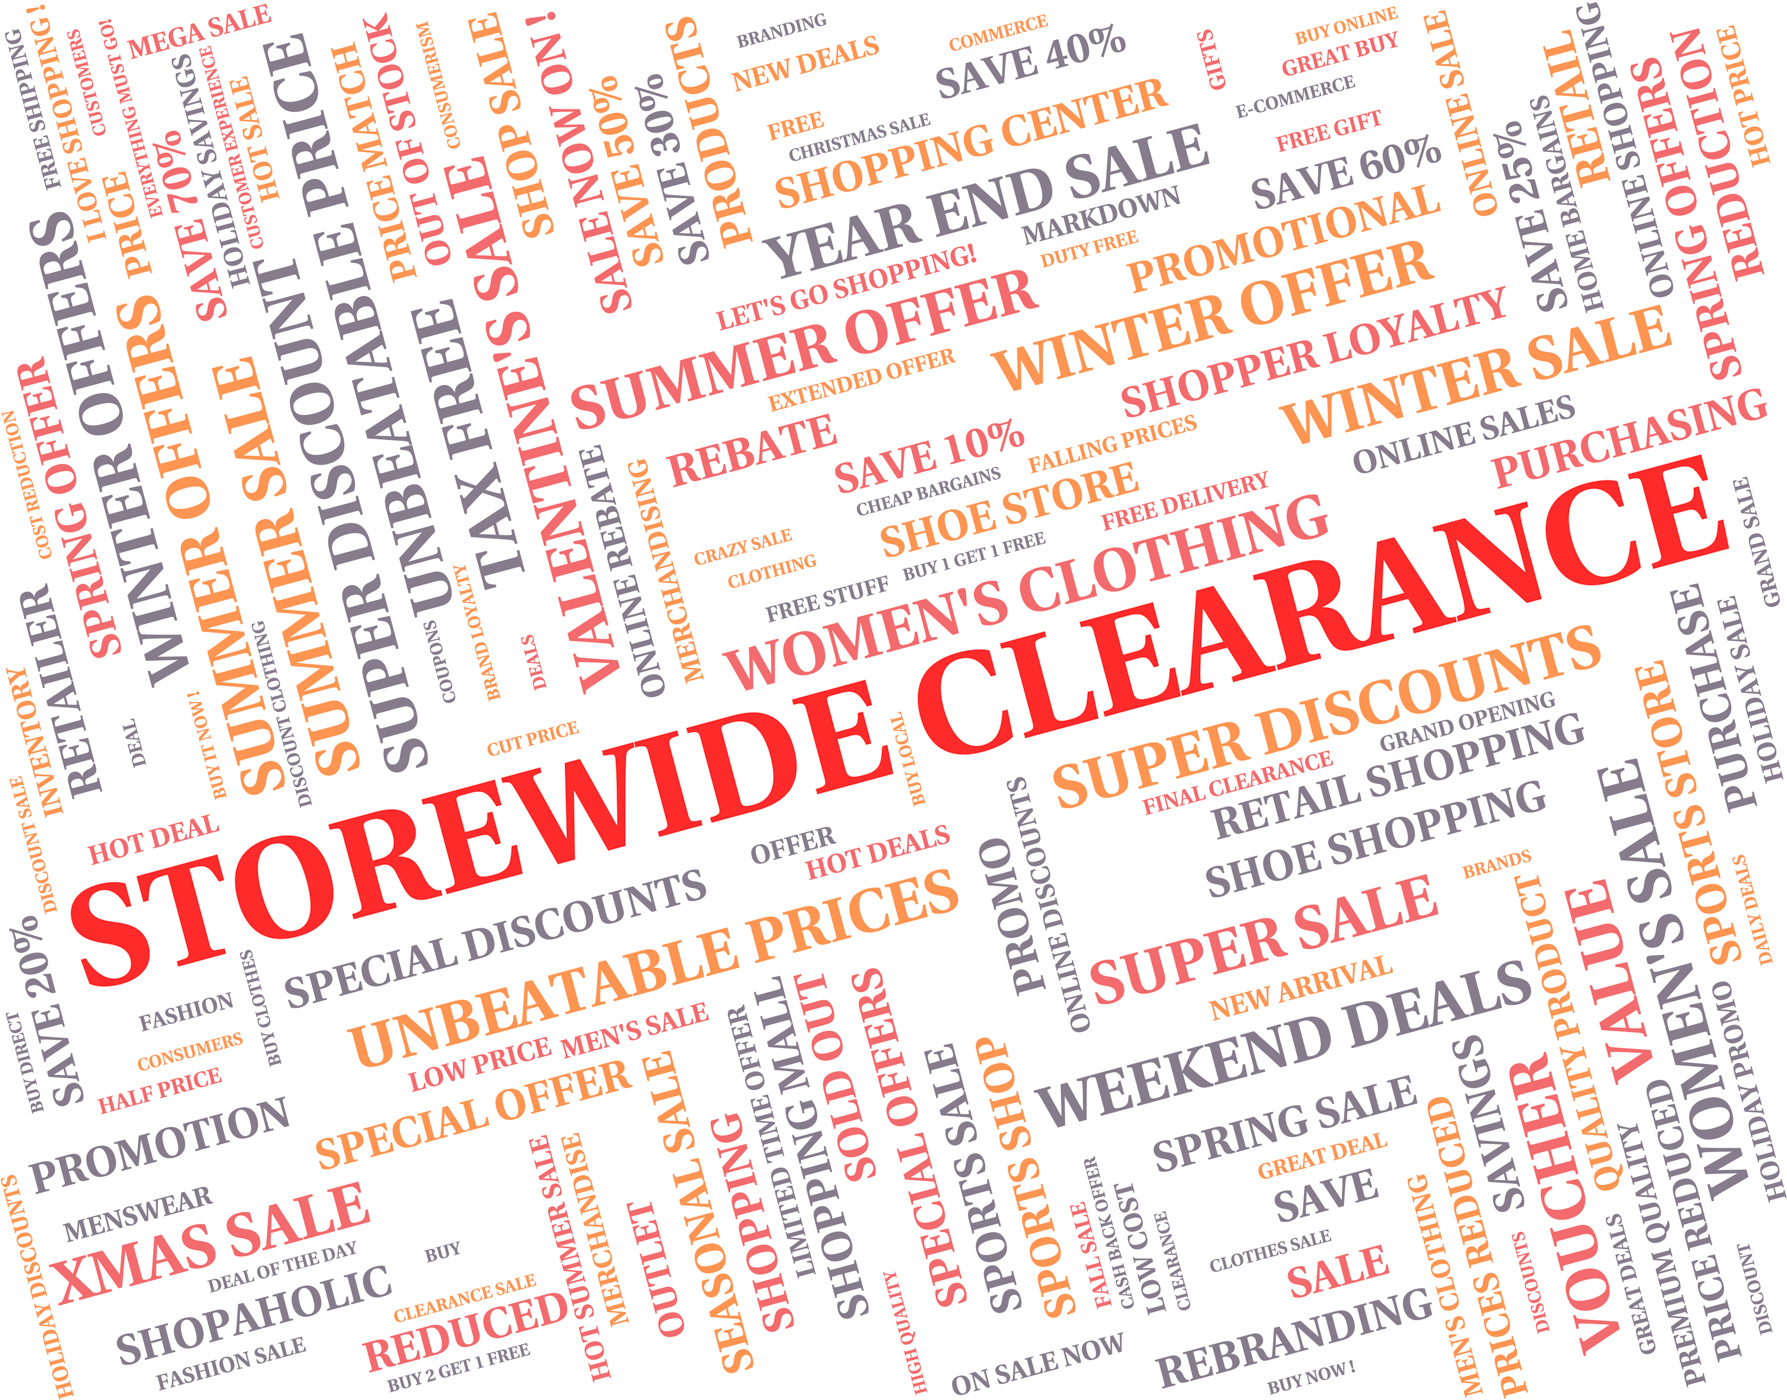 Storewide clearance indicates the lot and bargain photo